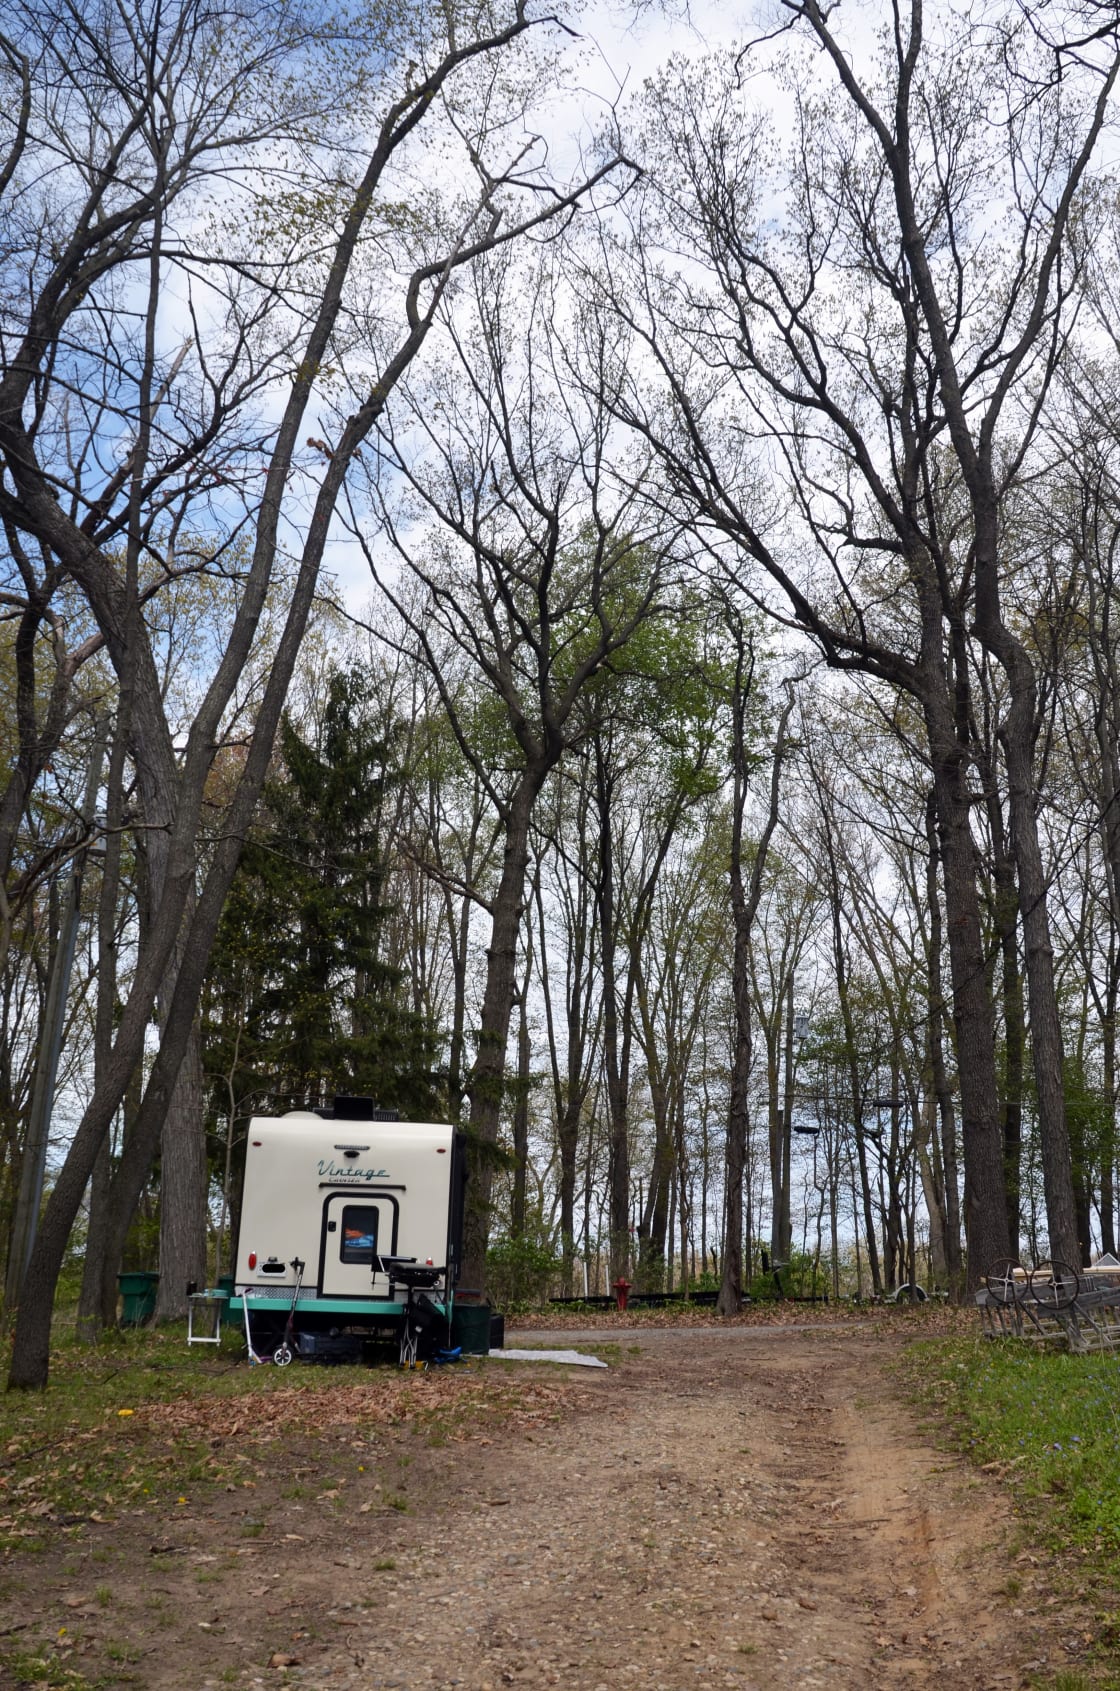 The campsite is shaded by old growth trees on a private road.